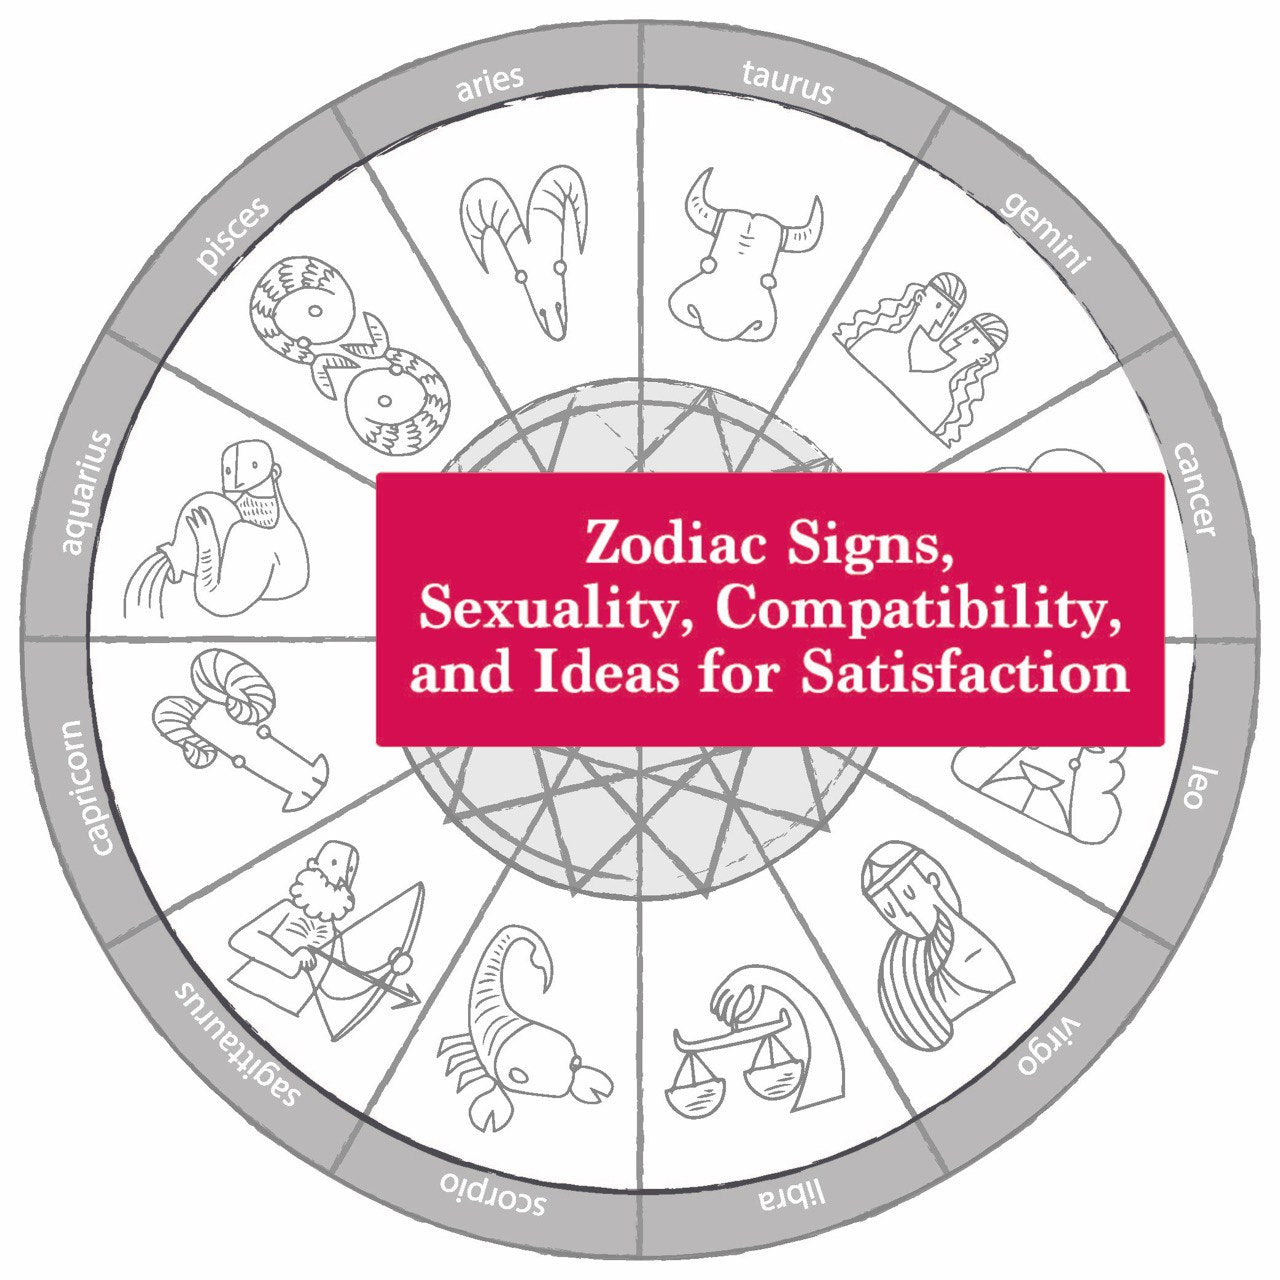 Zodiac Signs, Sexuality, Compatibility, and Ideas for Satisfaction